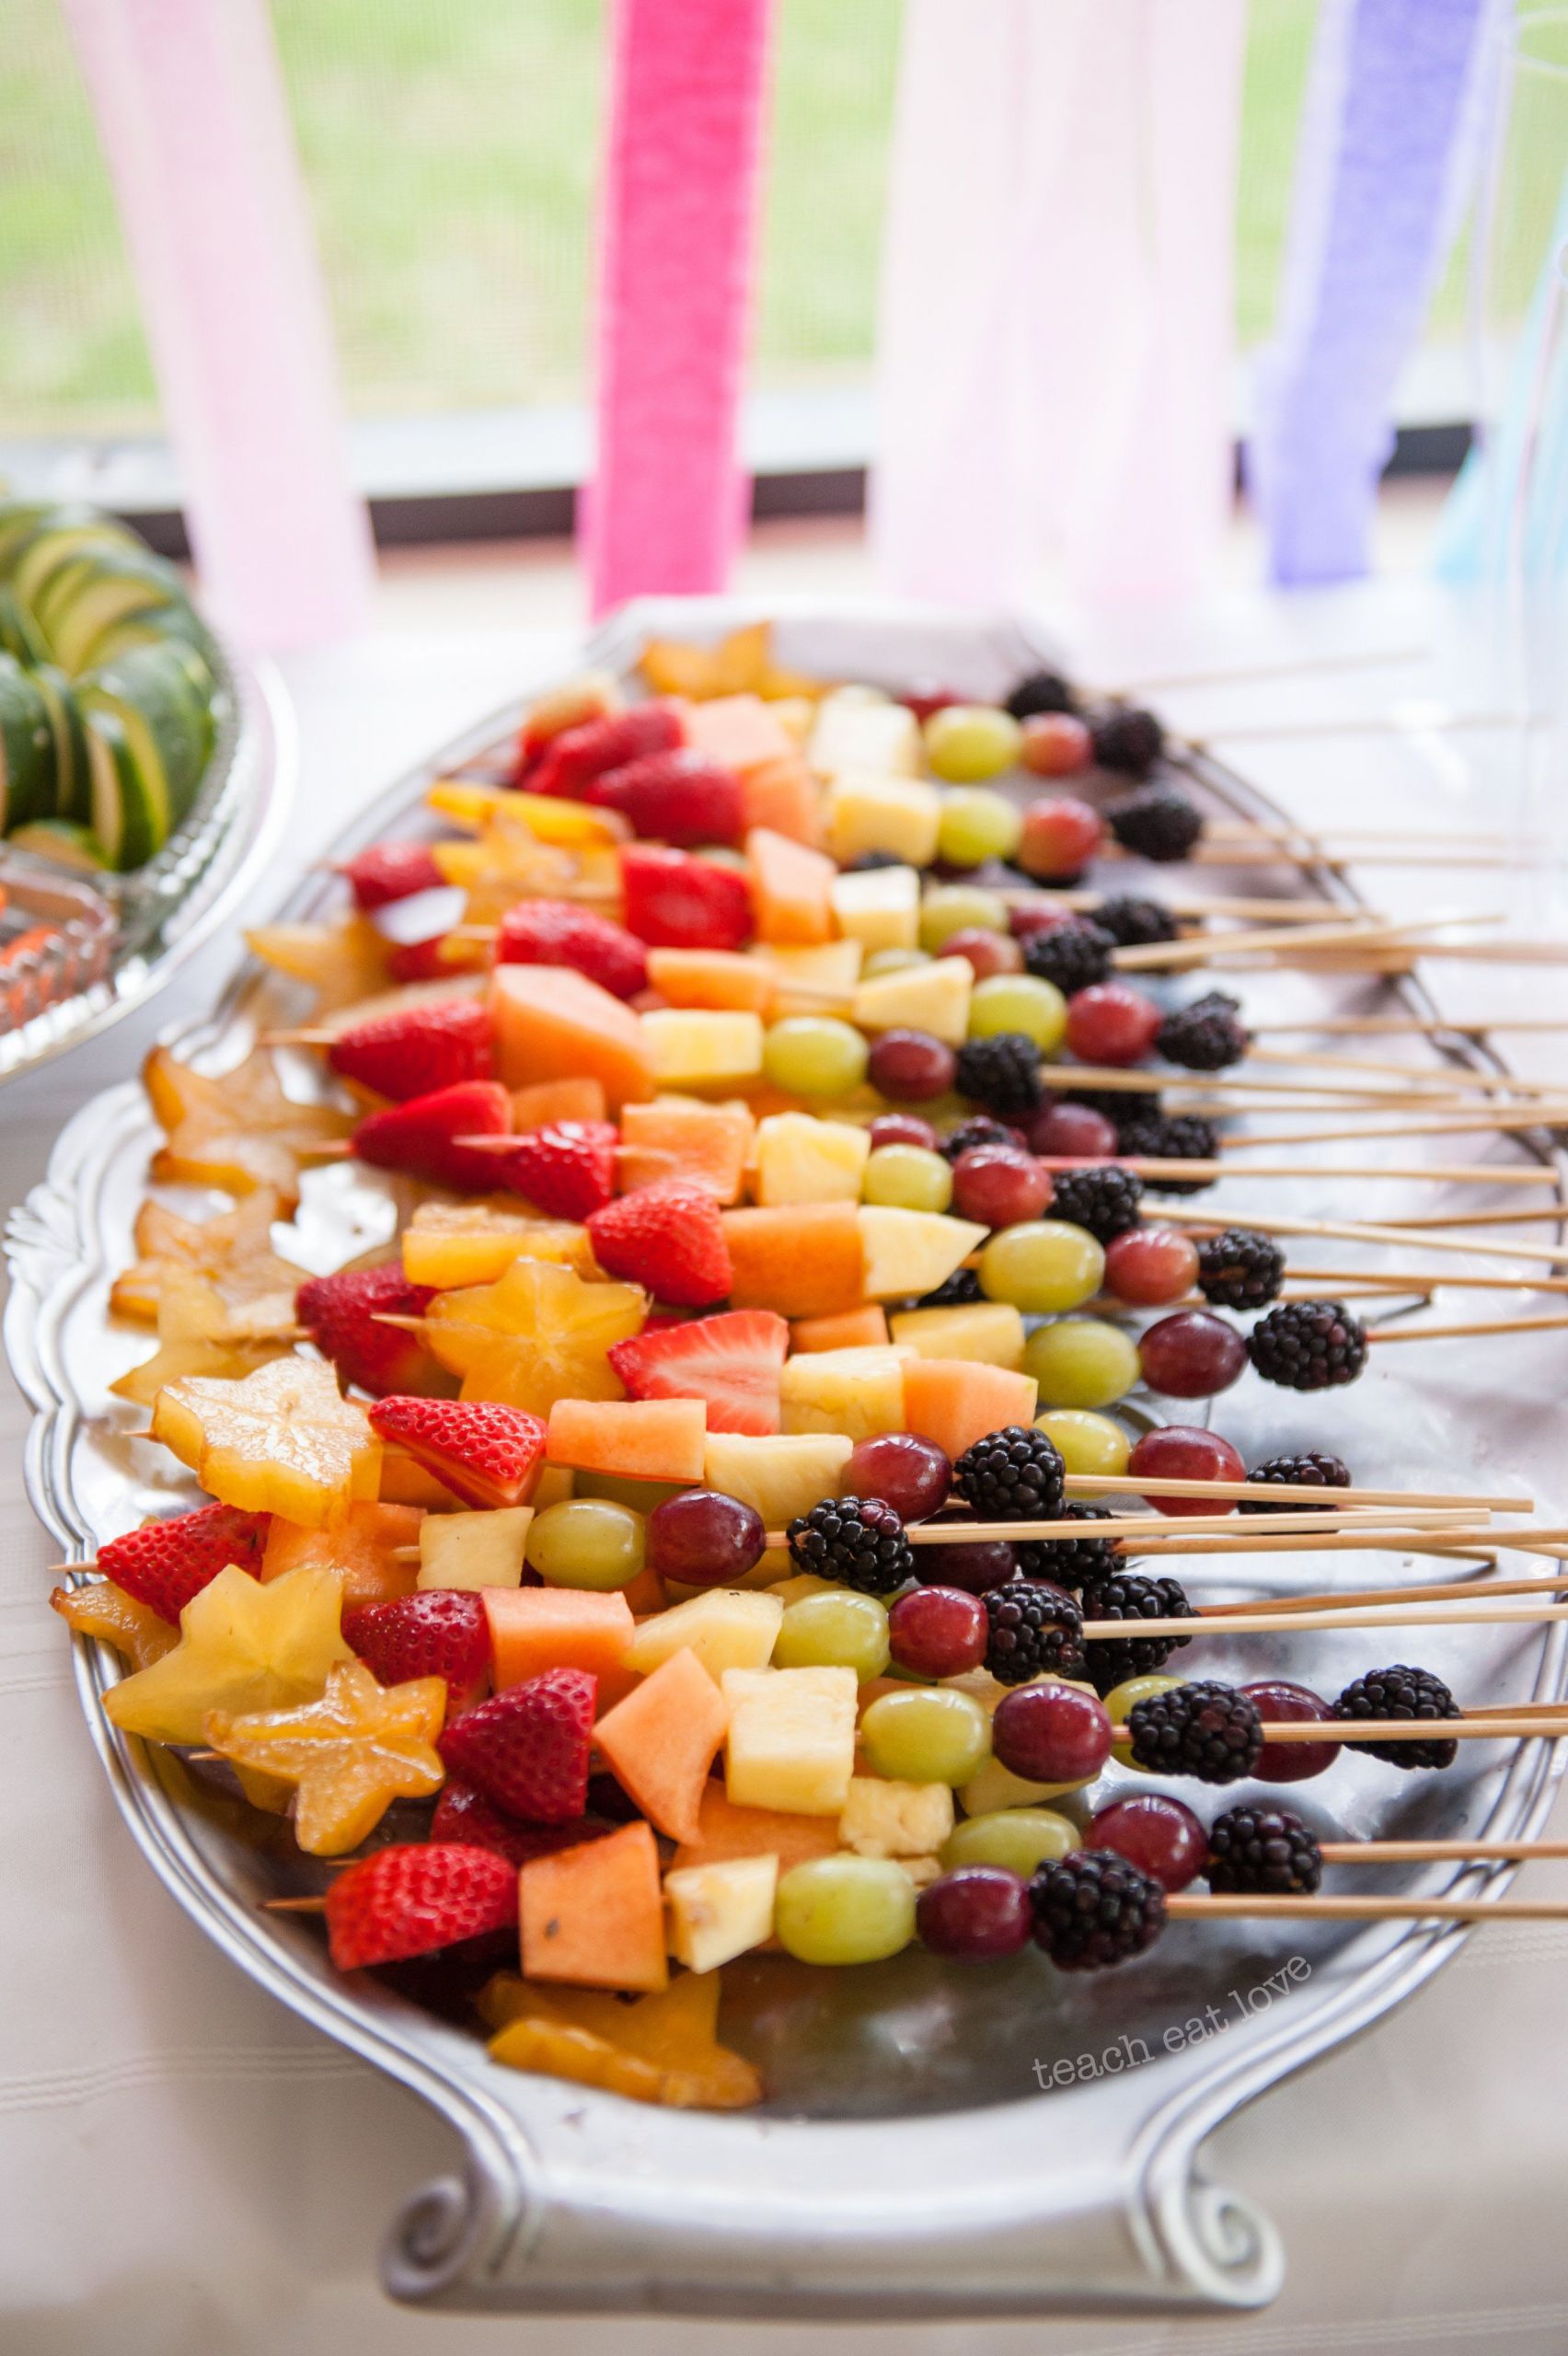 Food Ideas For A 2 Year Old Birthday Party
 Catering Ideas For Birthday Party